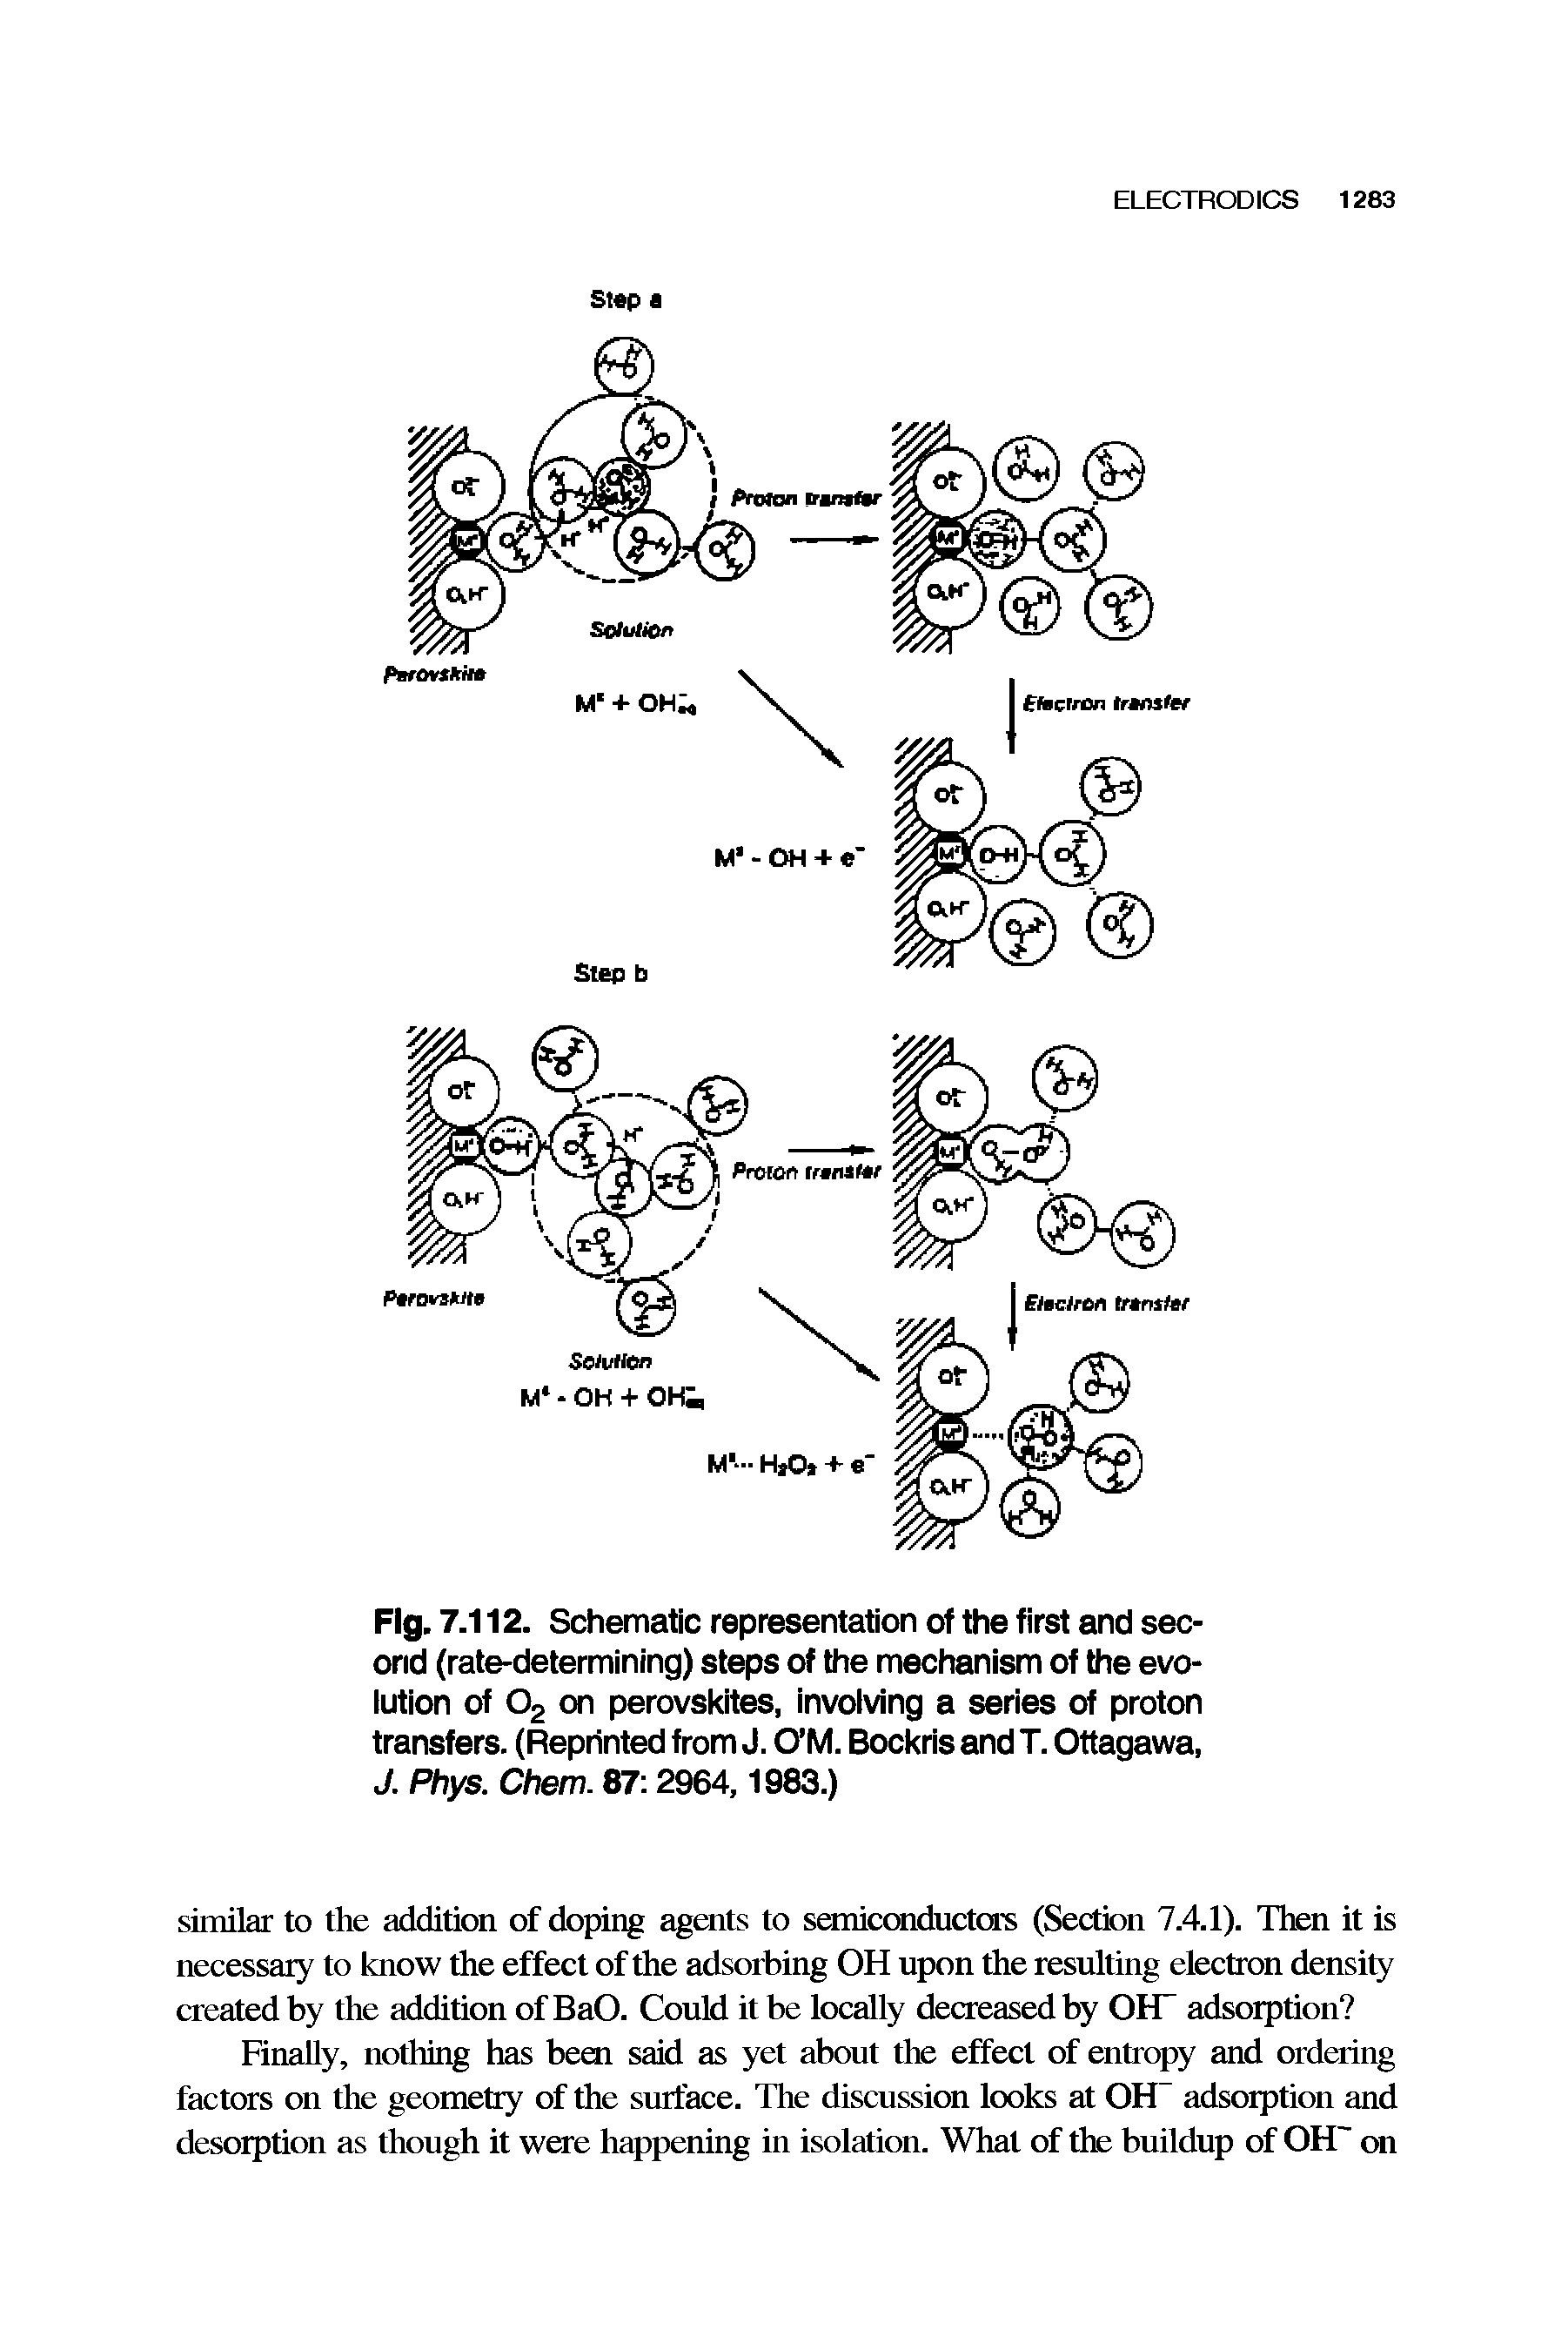 Fig. 7. 112. Schematic representation of the first and second (rate-determining) steps of the mechanism of the evolution of 02 on perovskites, involving a series of proton transfers. (Reprinted from J. O M. Bockris and T. Ottagawa, J. Phys. Chem. 87 2964,1983.)...